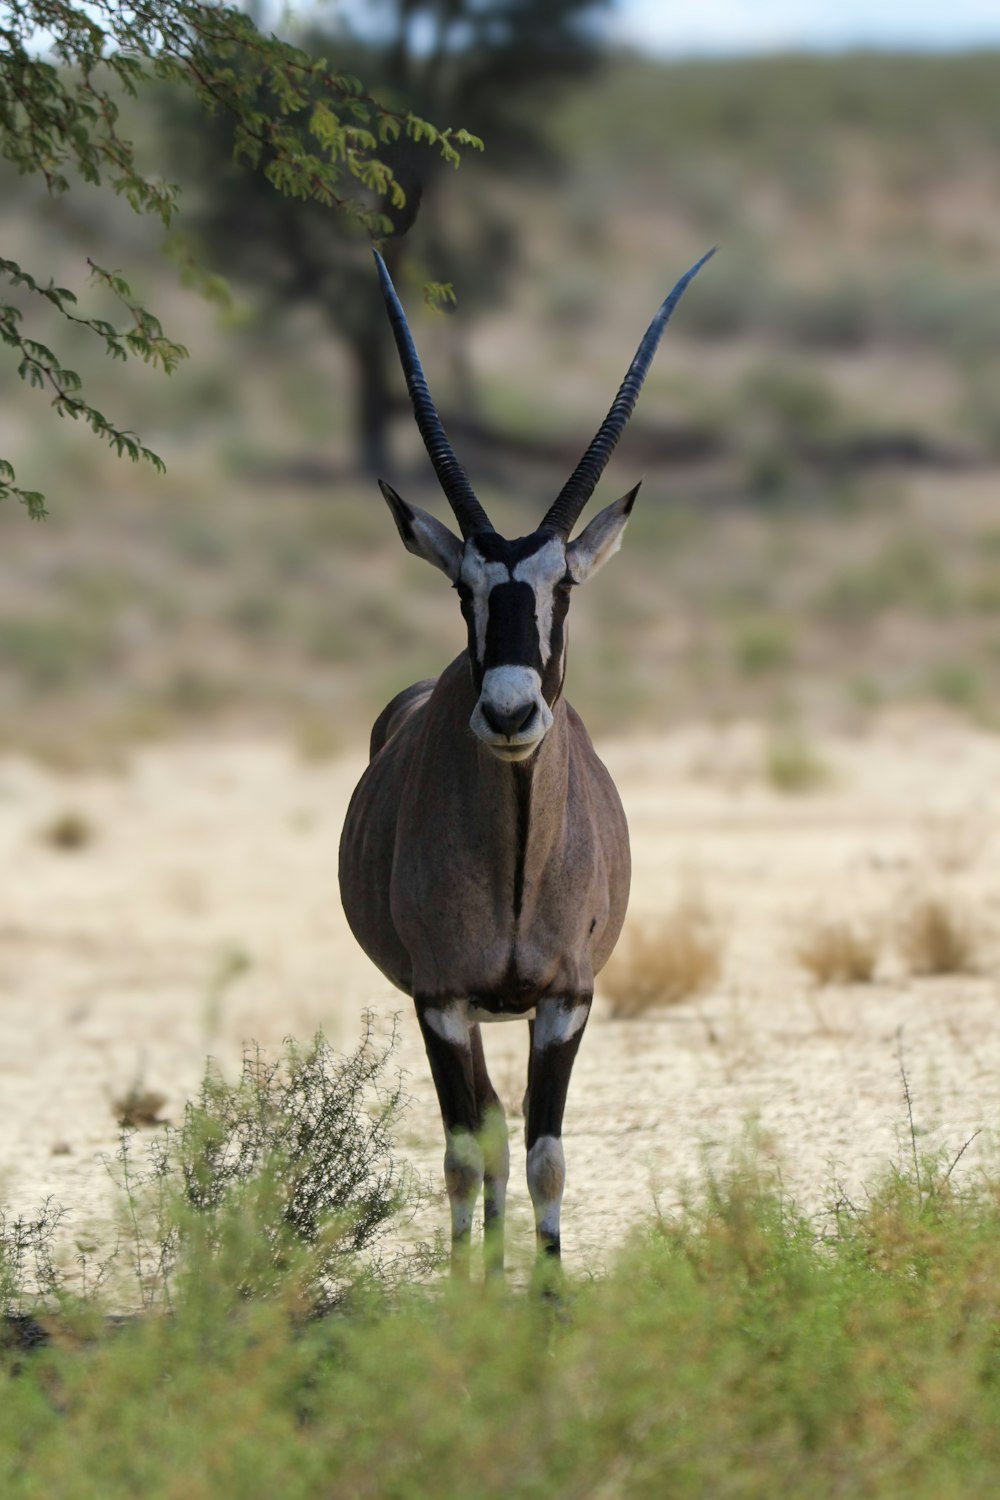 an antelope standing in a field with trees in the background